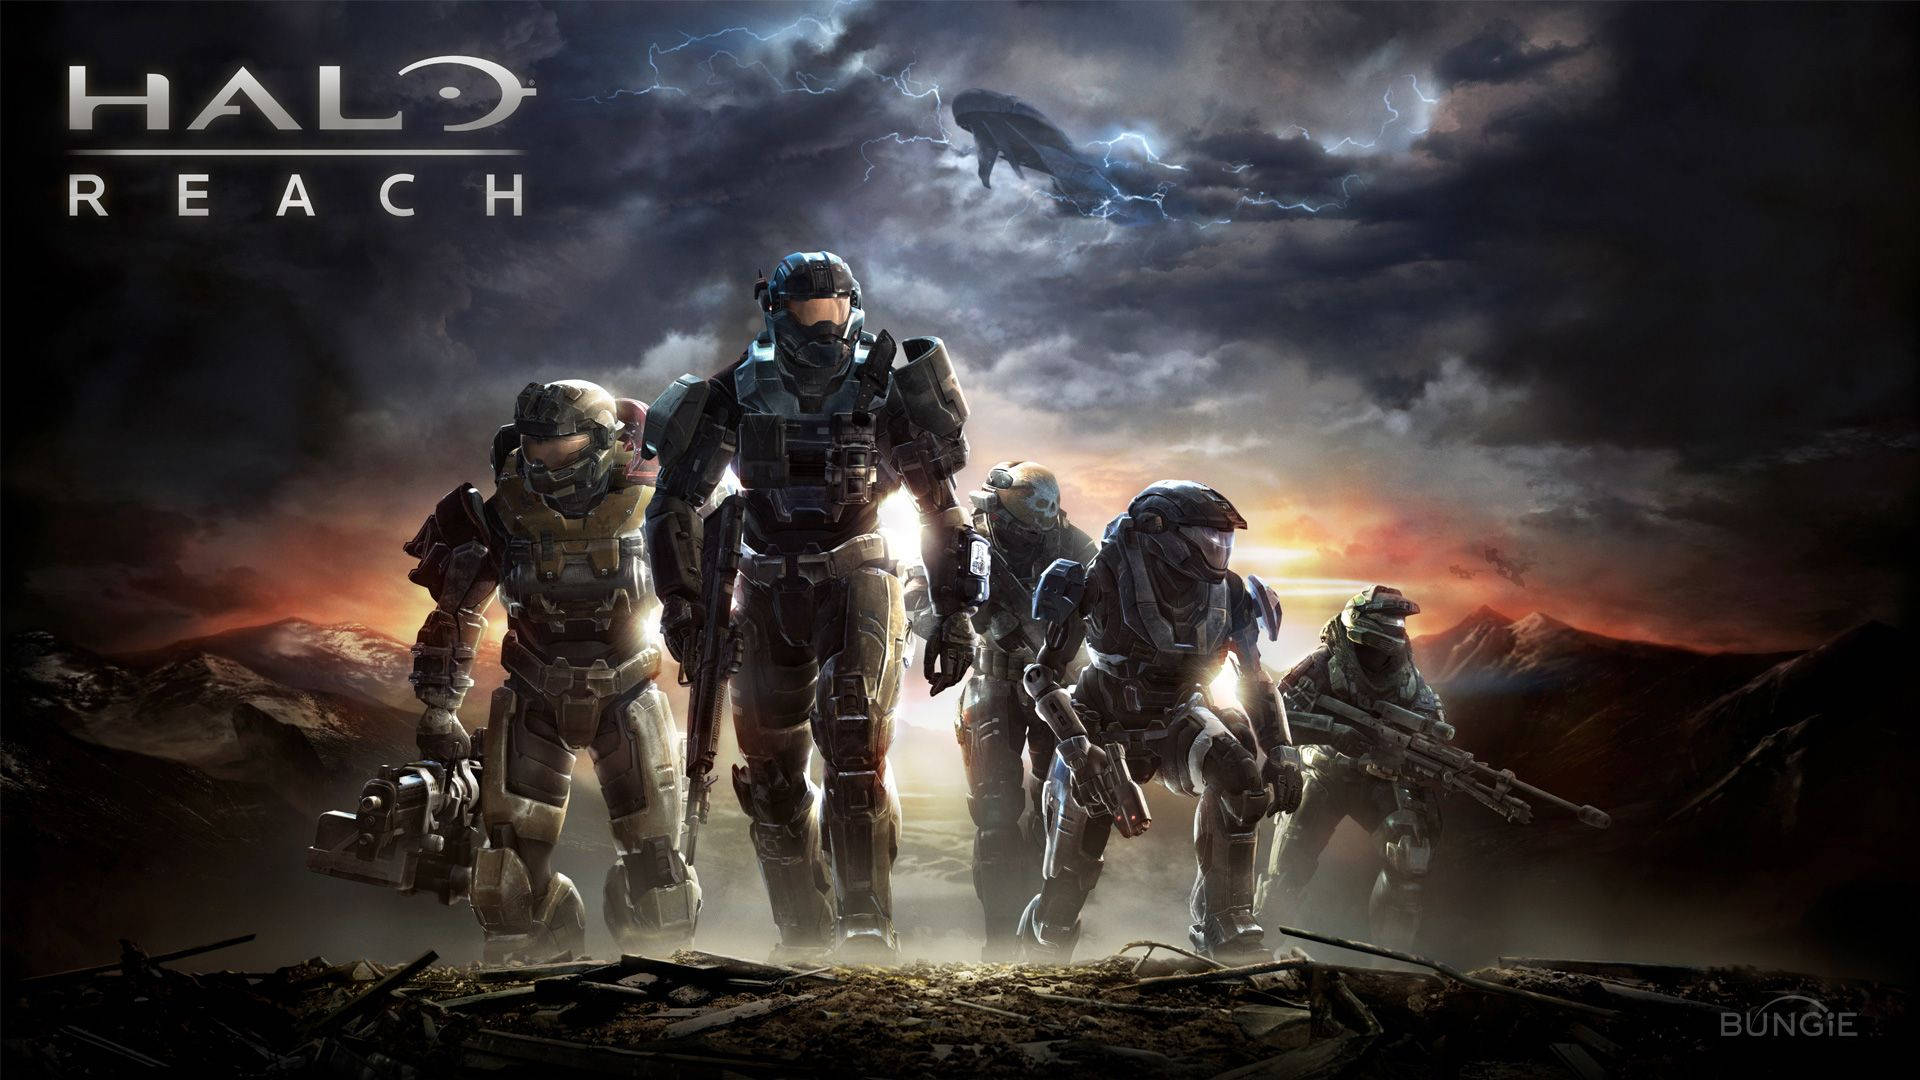 Master Chief and Cortana prepare for battle at dusk Wallpaper